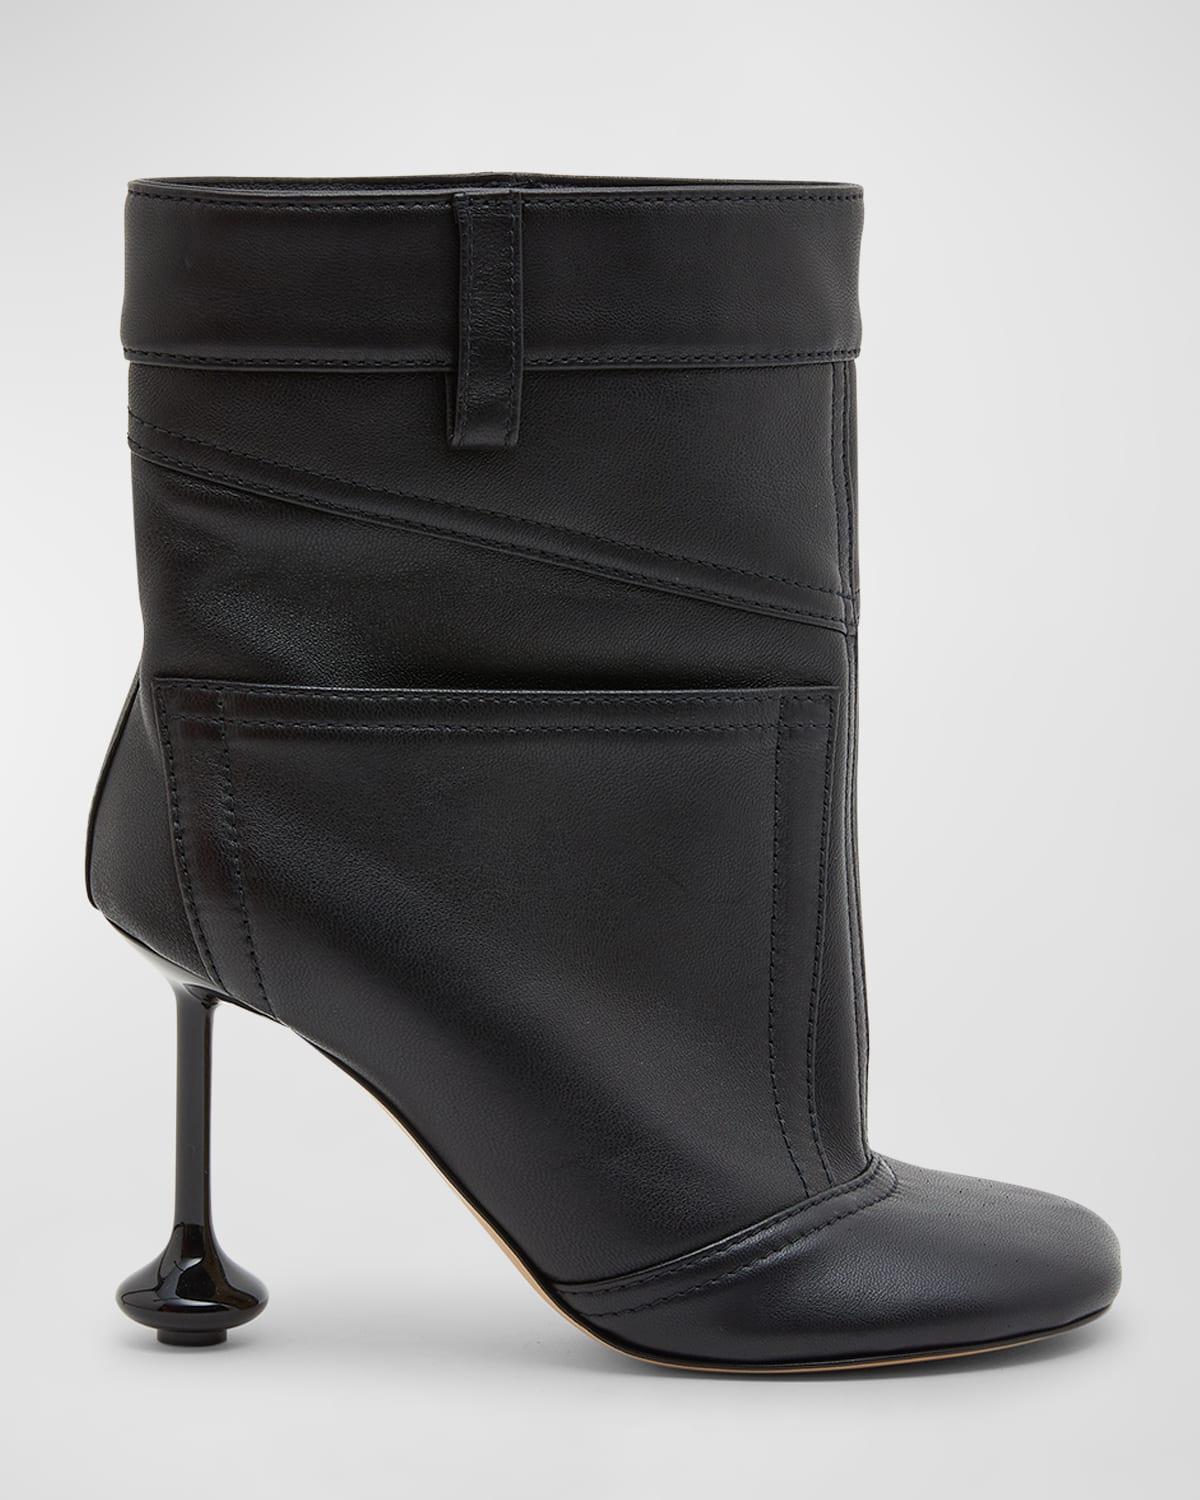 Loewe - Toy 90 Leather Ankle Boots - Womens - Black Product Image